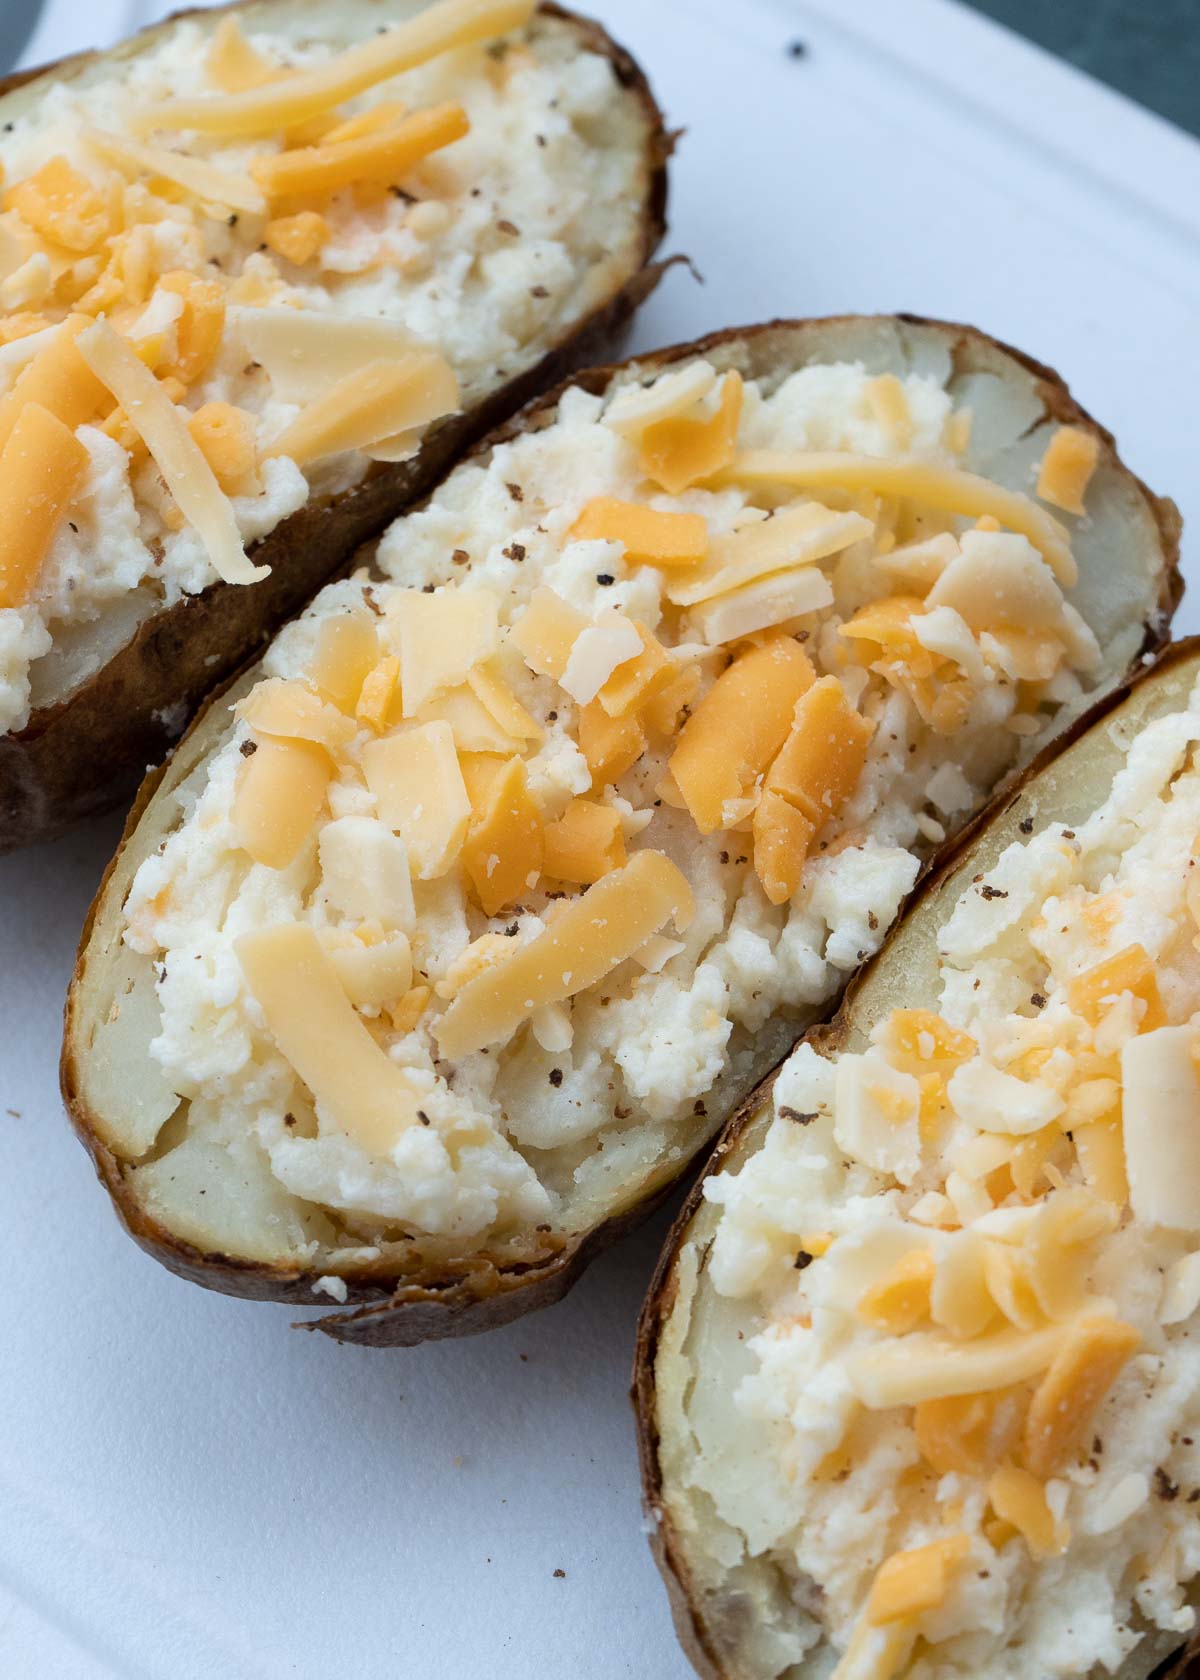 place filled baked potatoes in the air fryer